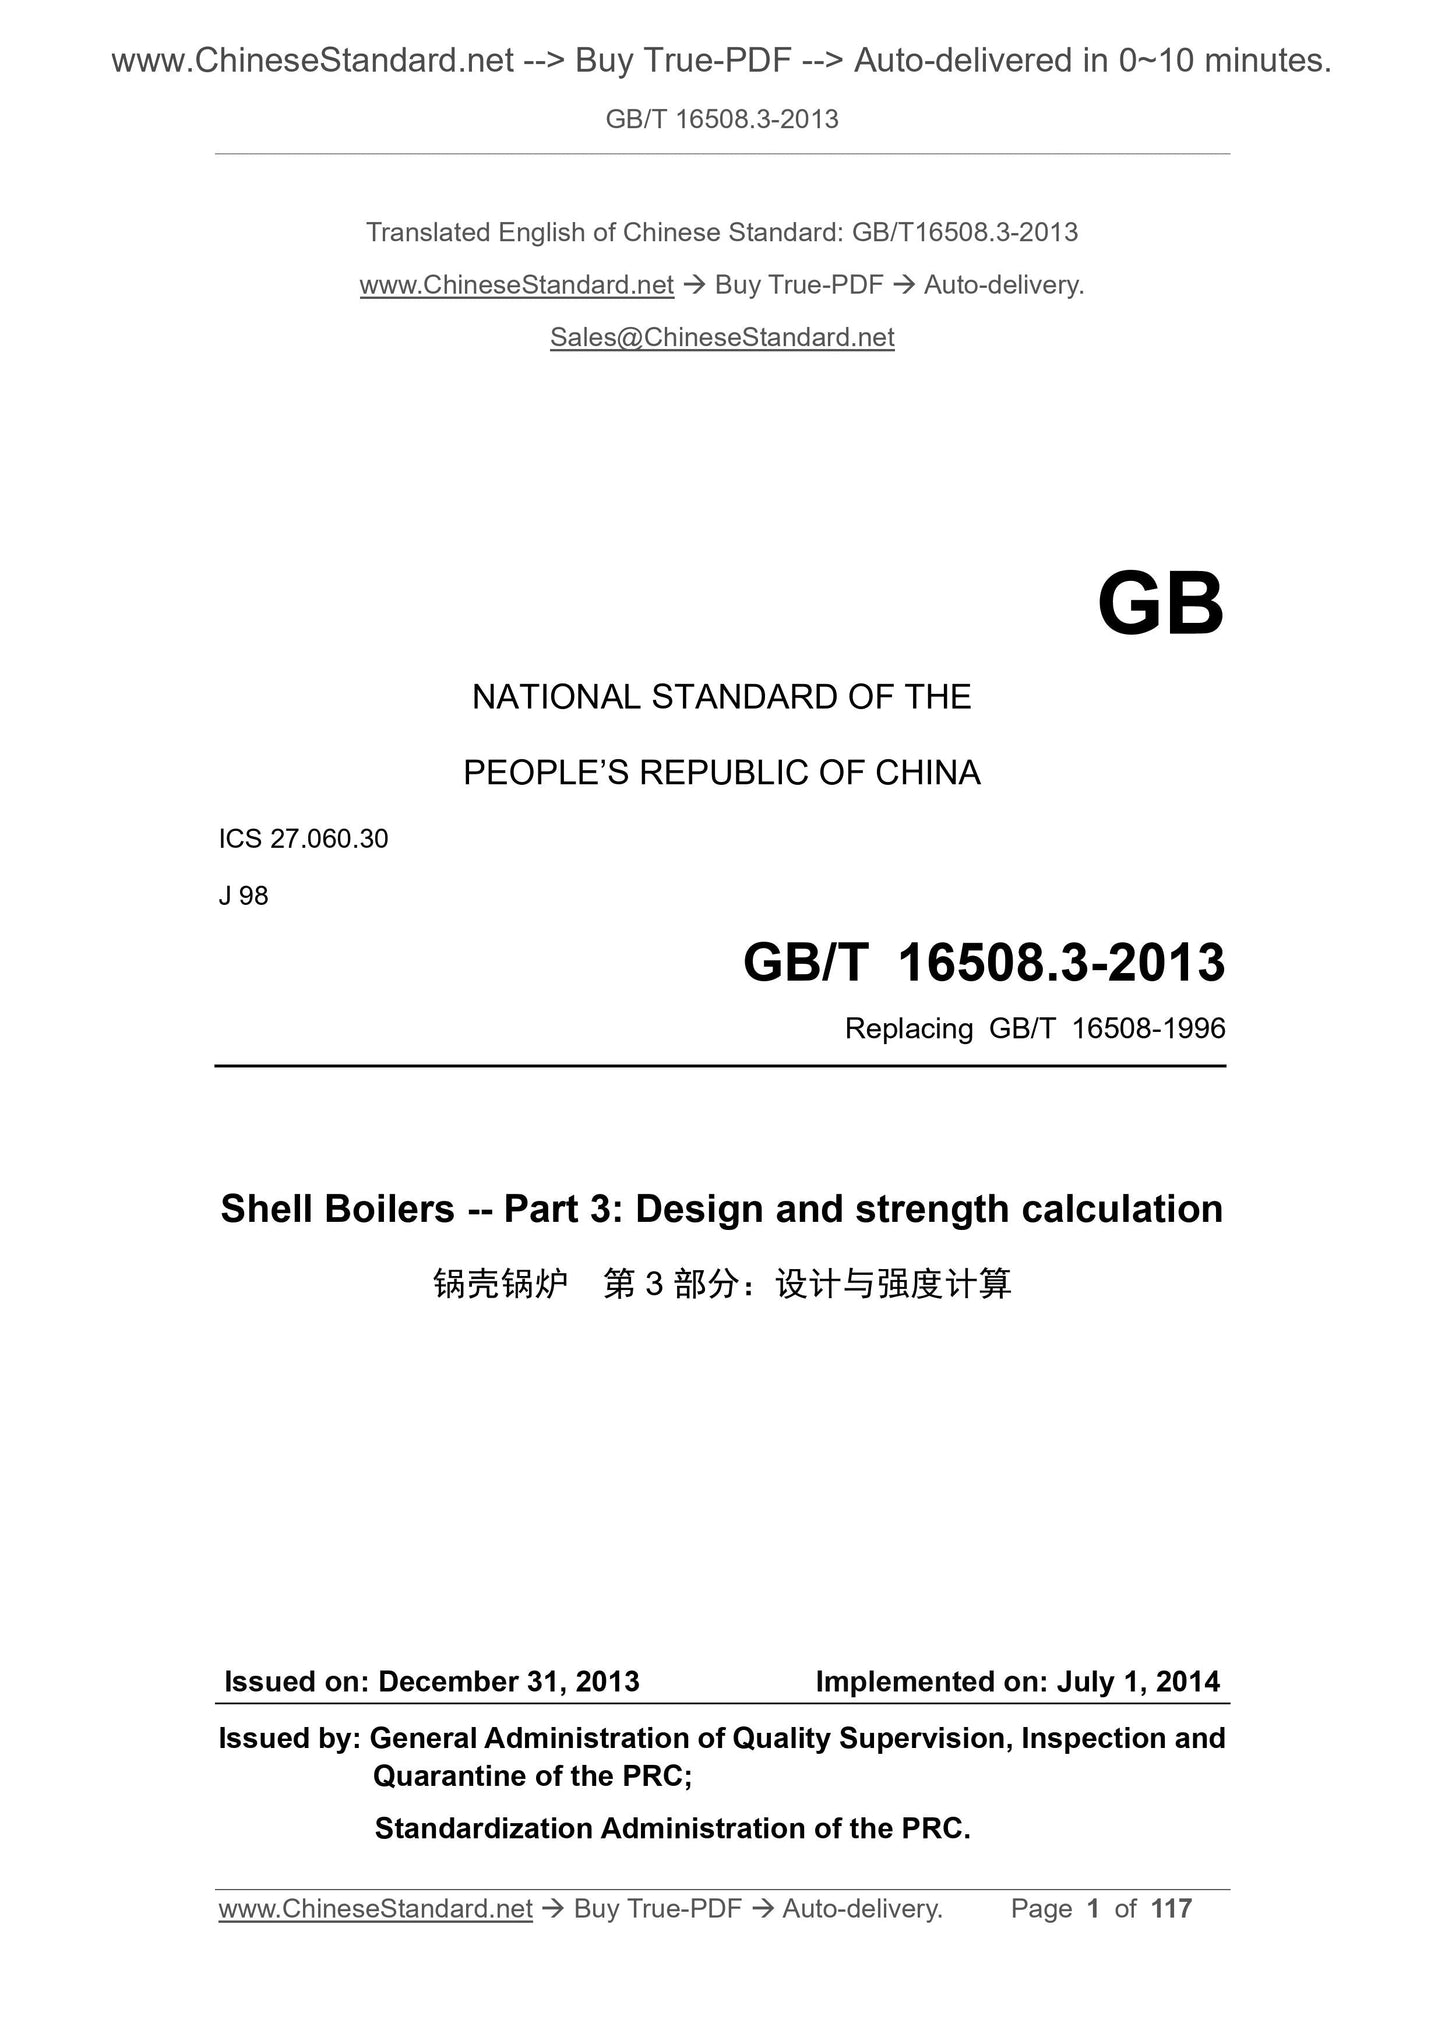 GB/T 16508.3-2013 Page 1